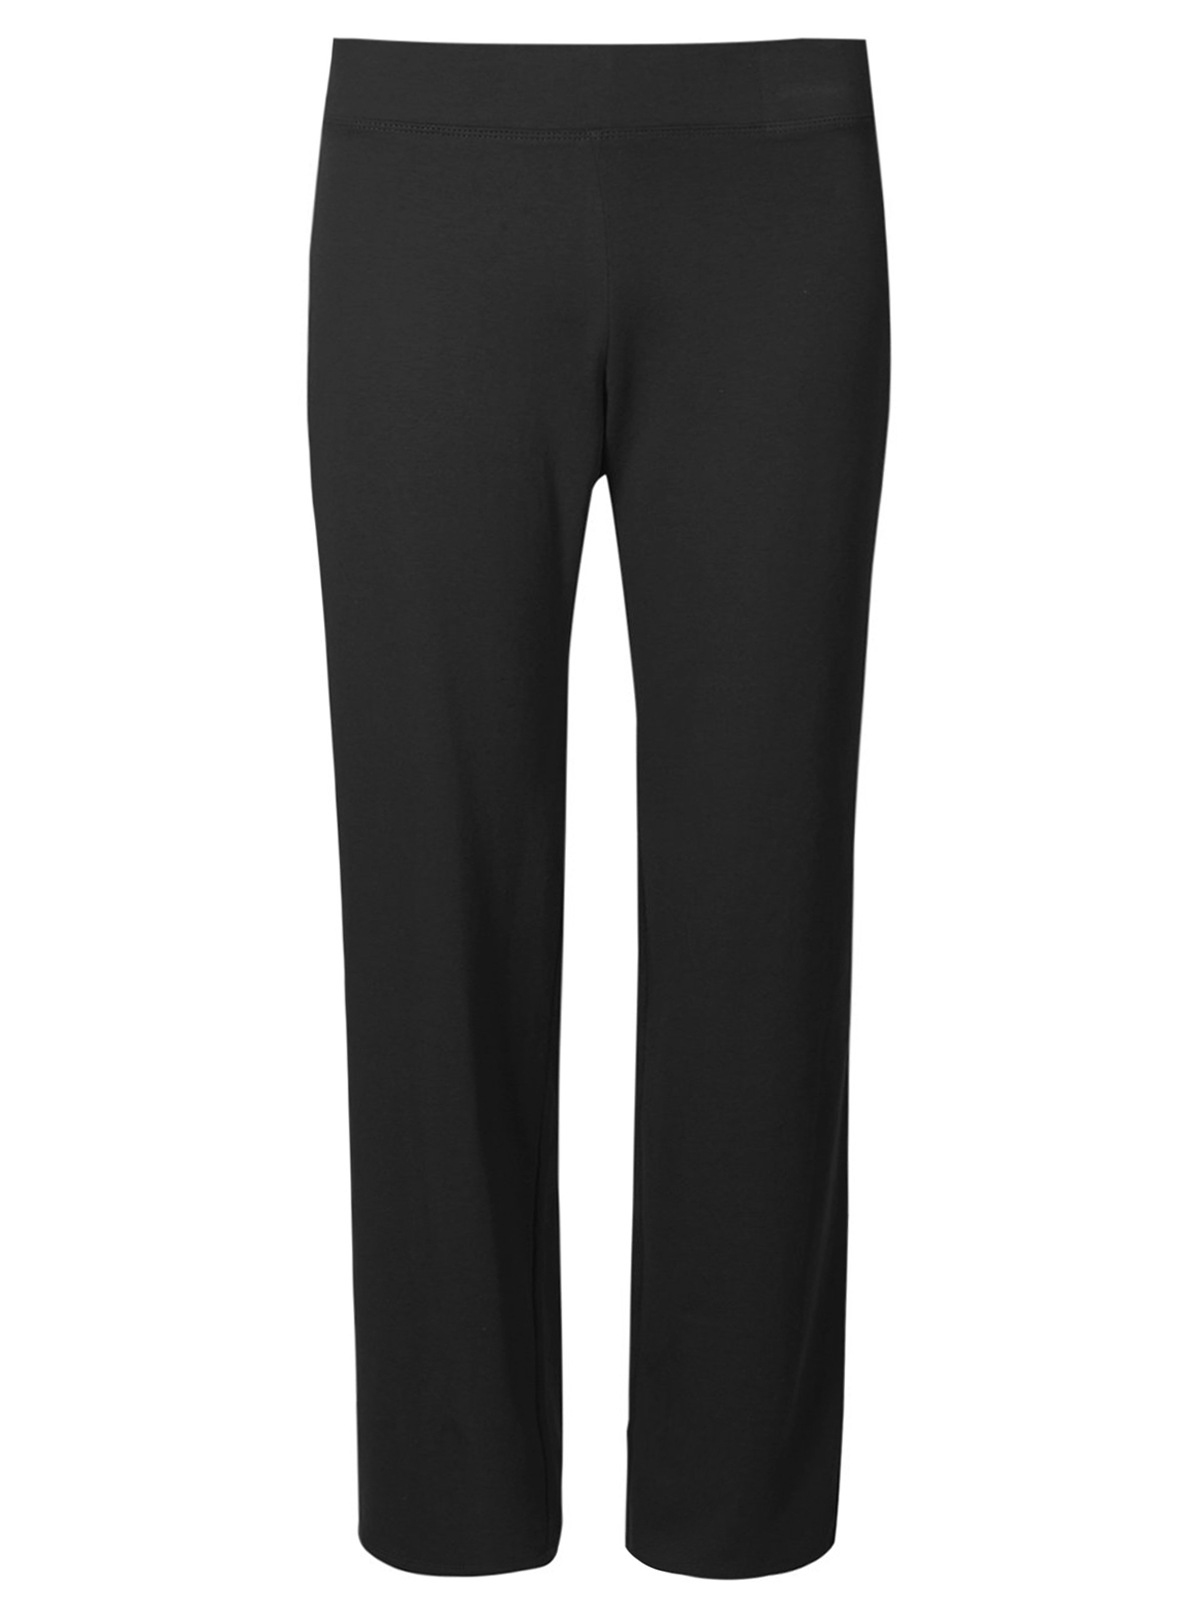 Marks and Spencer - - M&5 BLACK Cotton Rich Stay New Jogger Bottoms ...